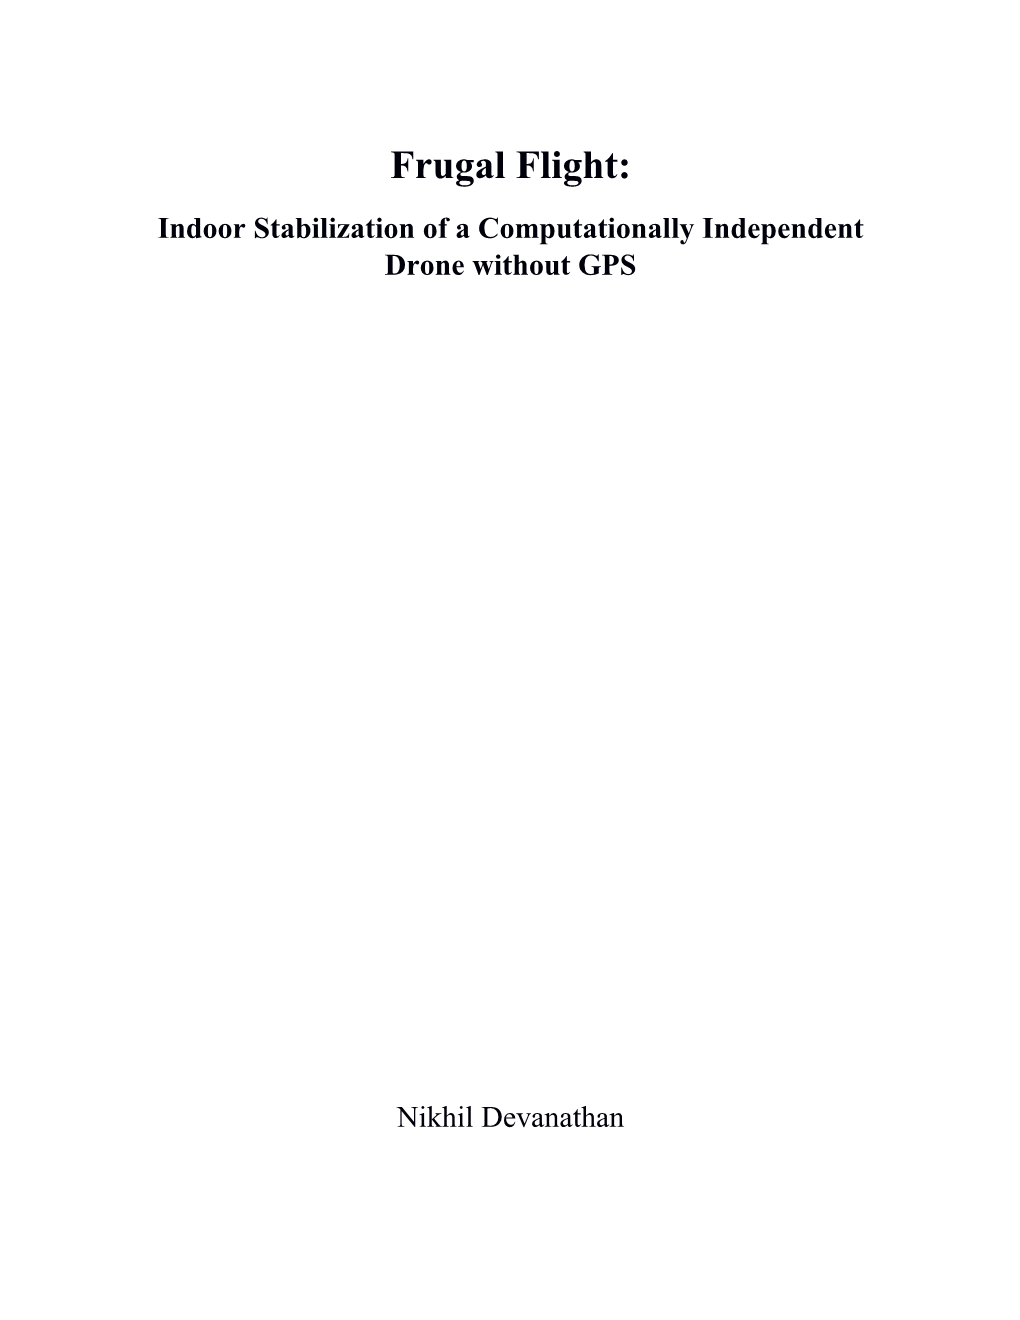 Frugal Flight: Indoor Stabilization of a Computationally Independent Drone Without GPS